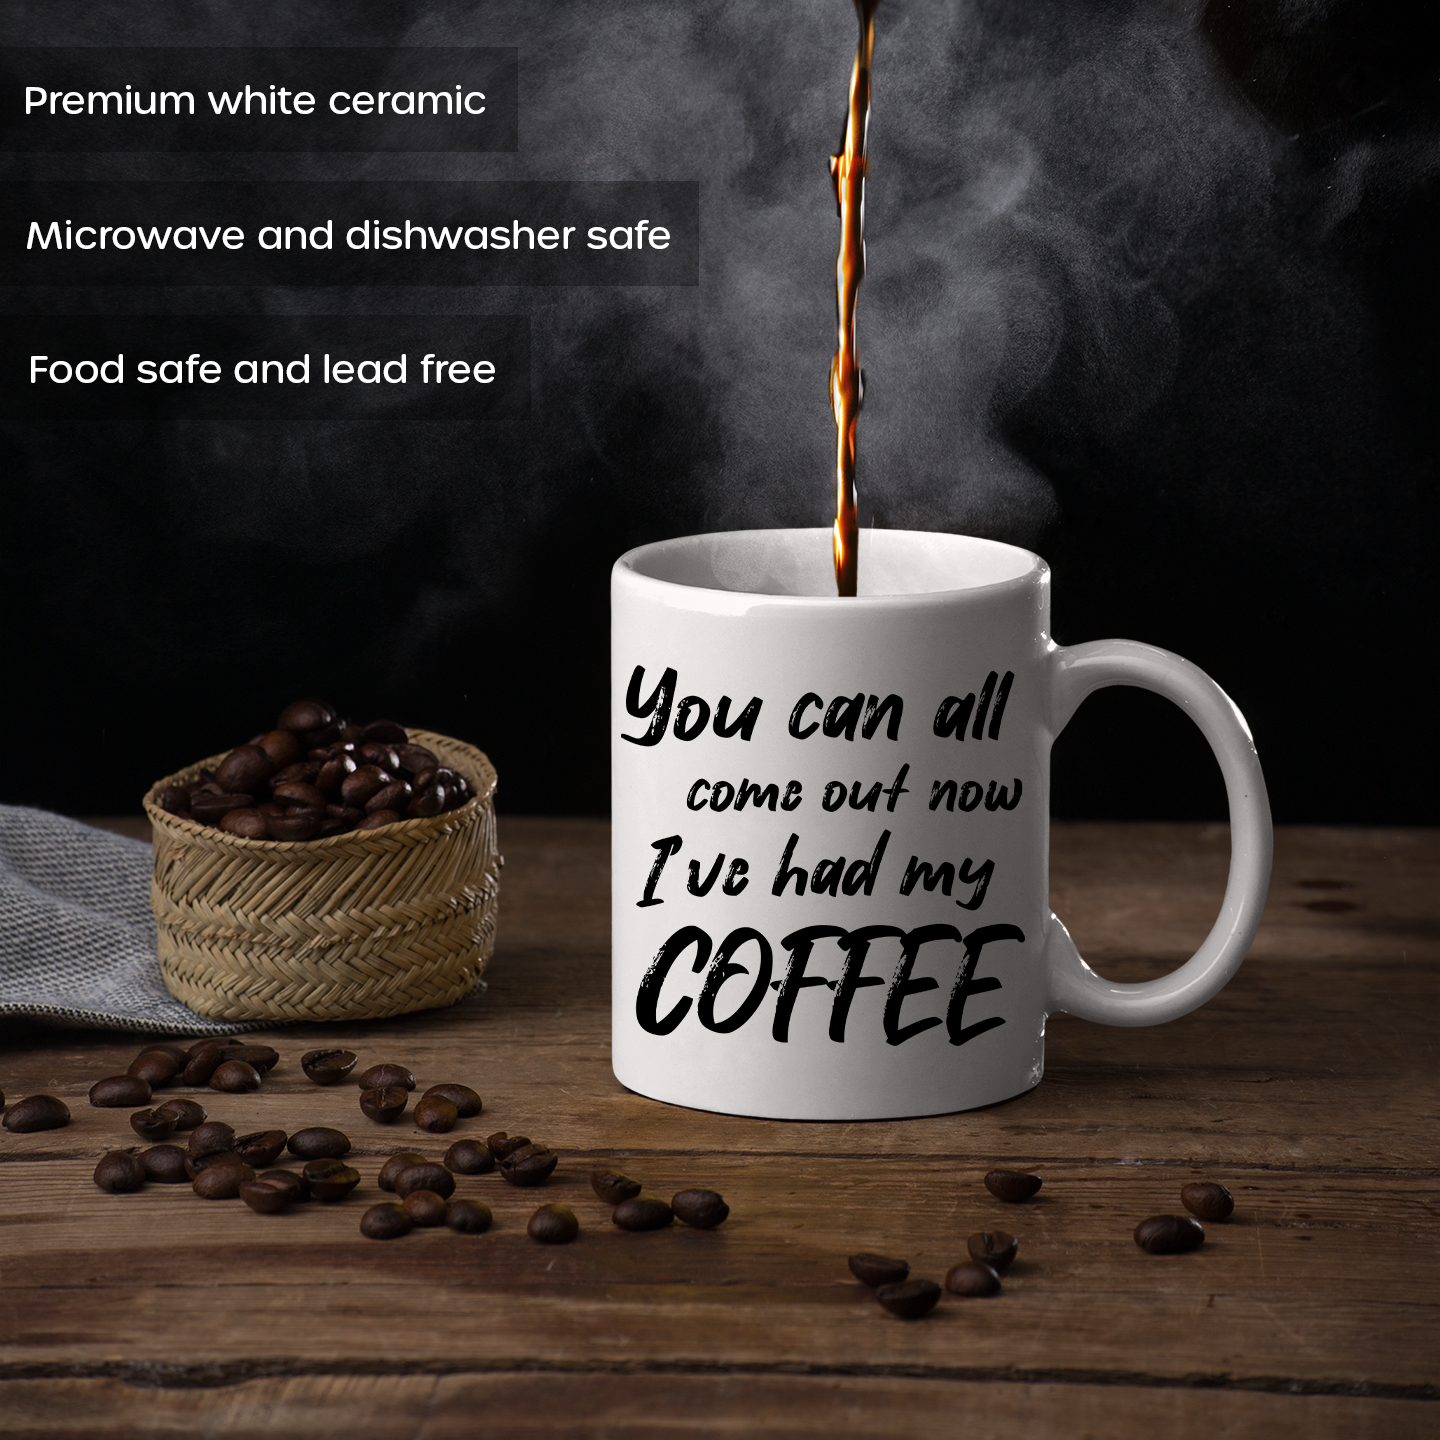 "Come Out Now" Funny Coffee Mug 11oz - Switzer Kreations